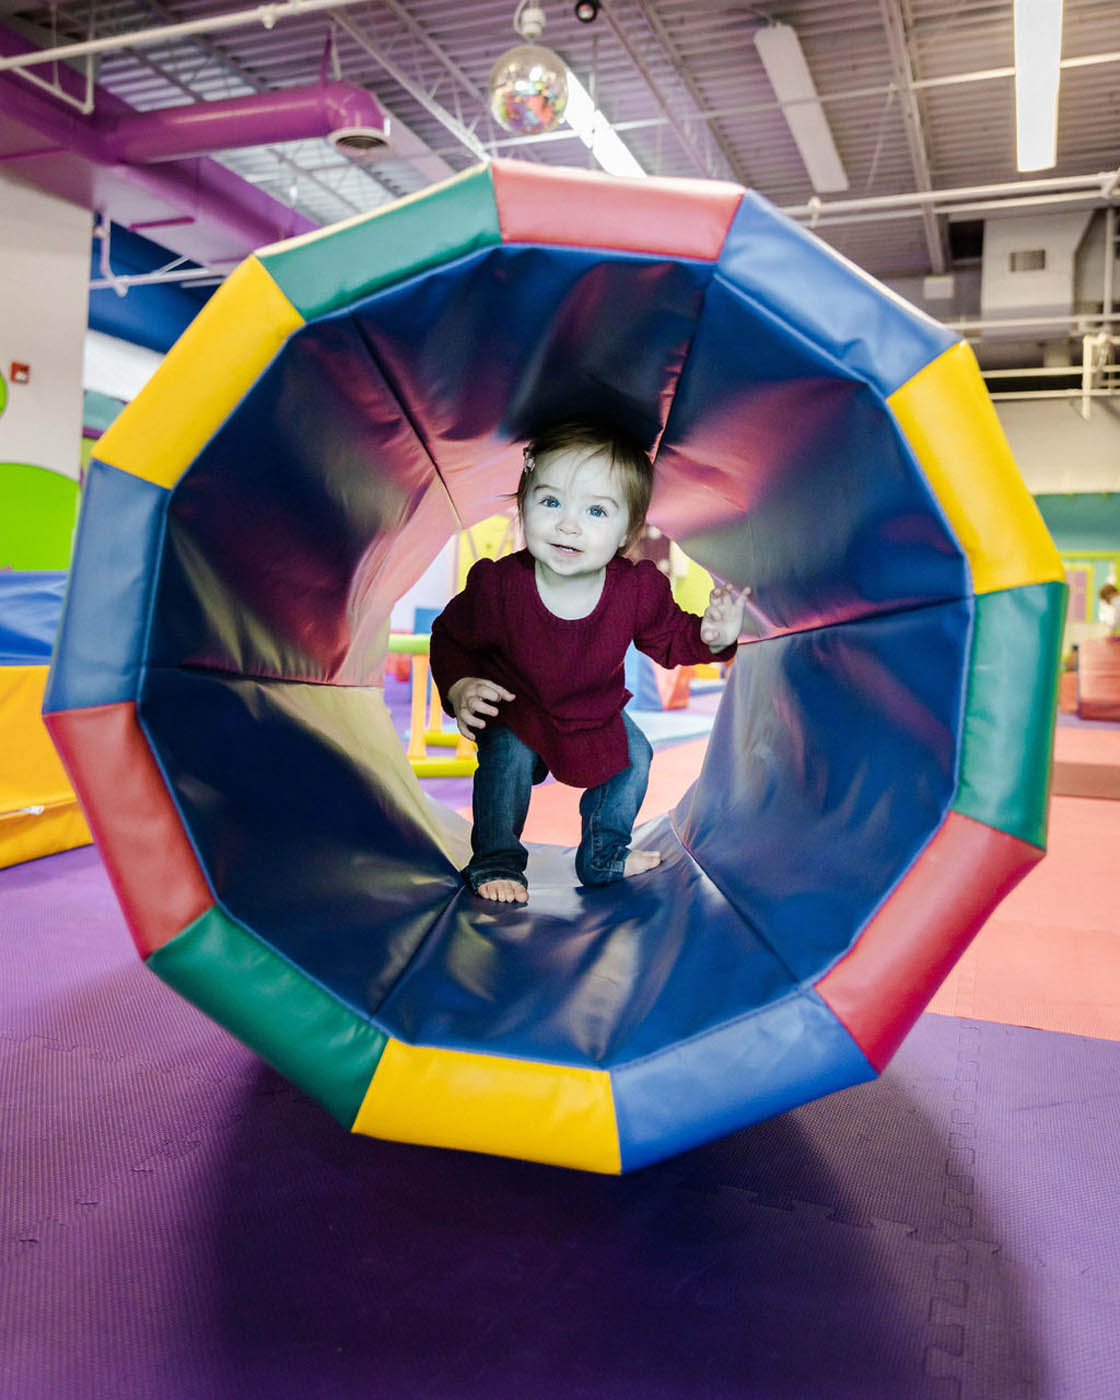 A child having fun inside a tube at a Romp n' Roll indoor playground franchise.